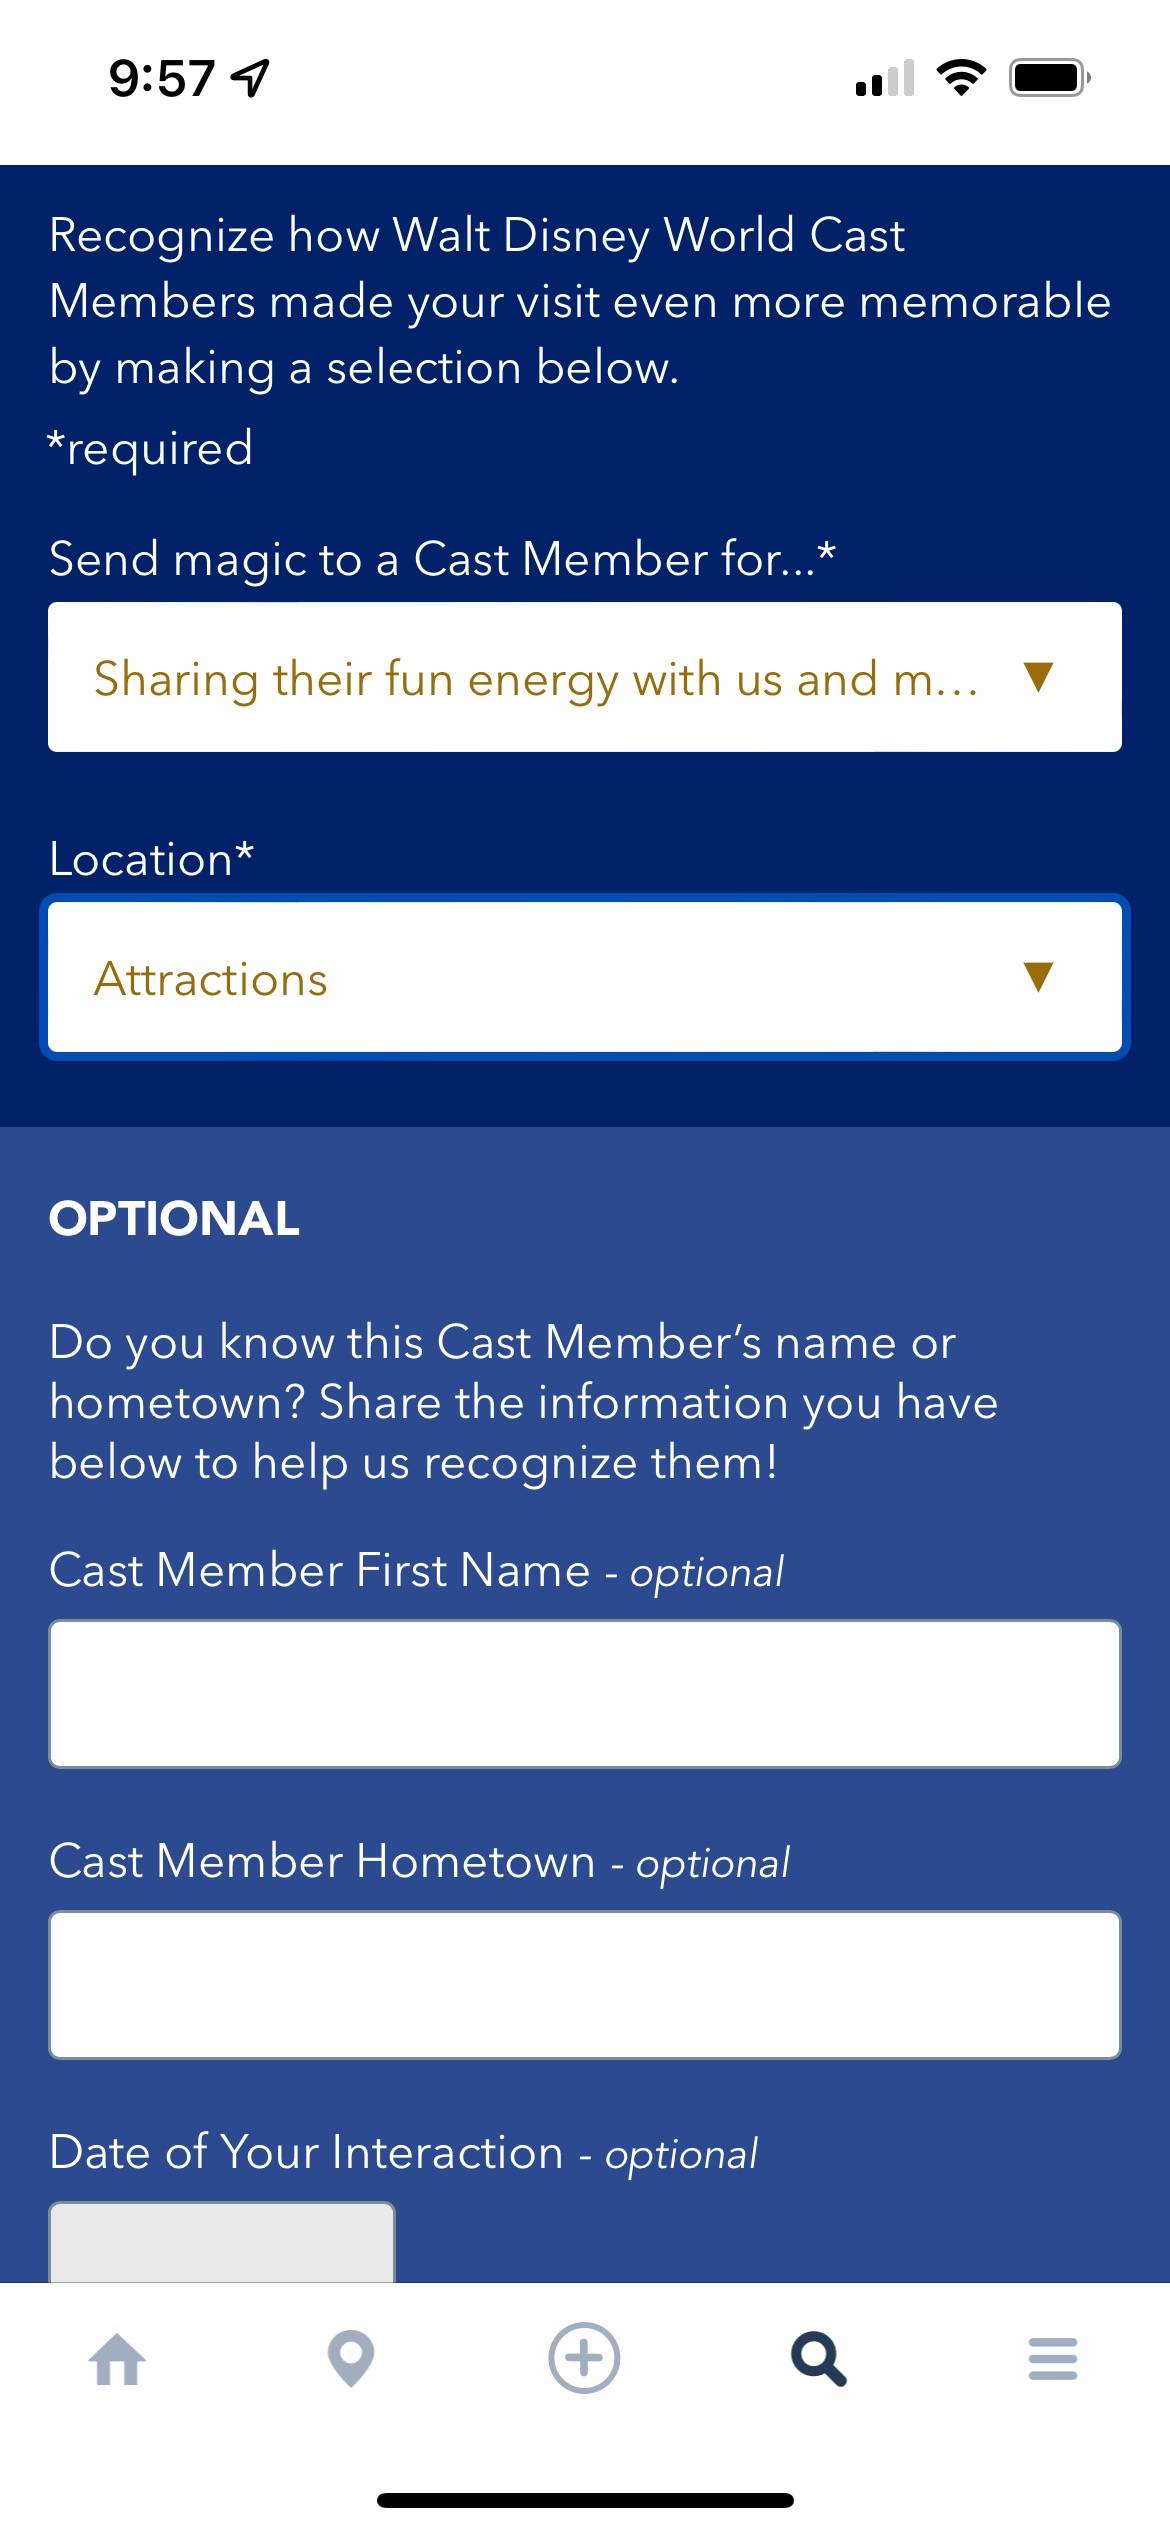 Walt Disney World Cast Compliment feature improved in My Disney Experience app